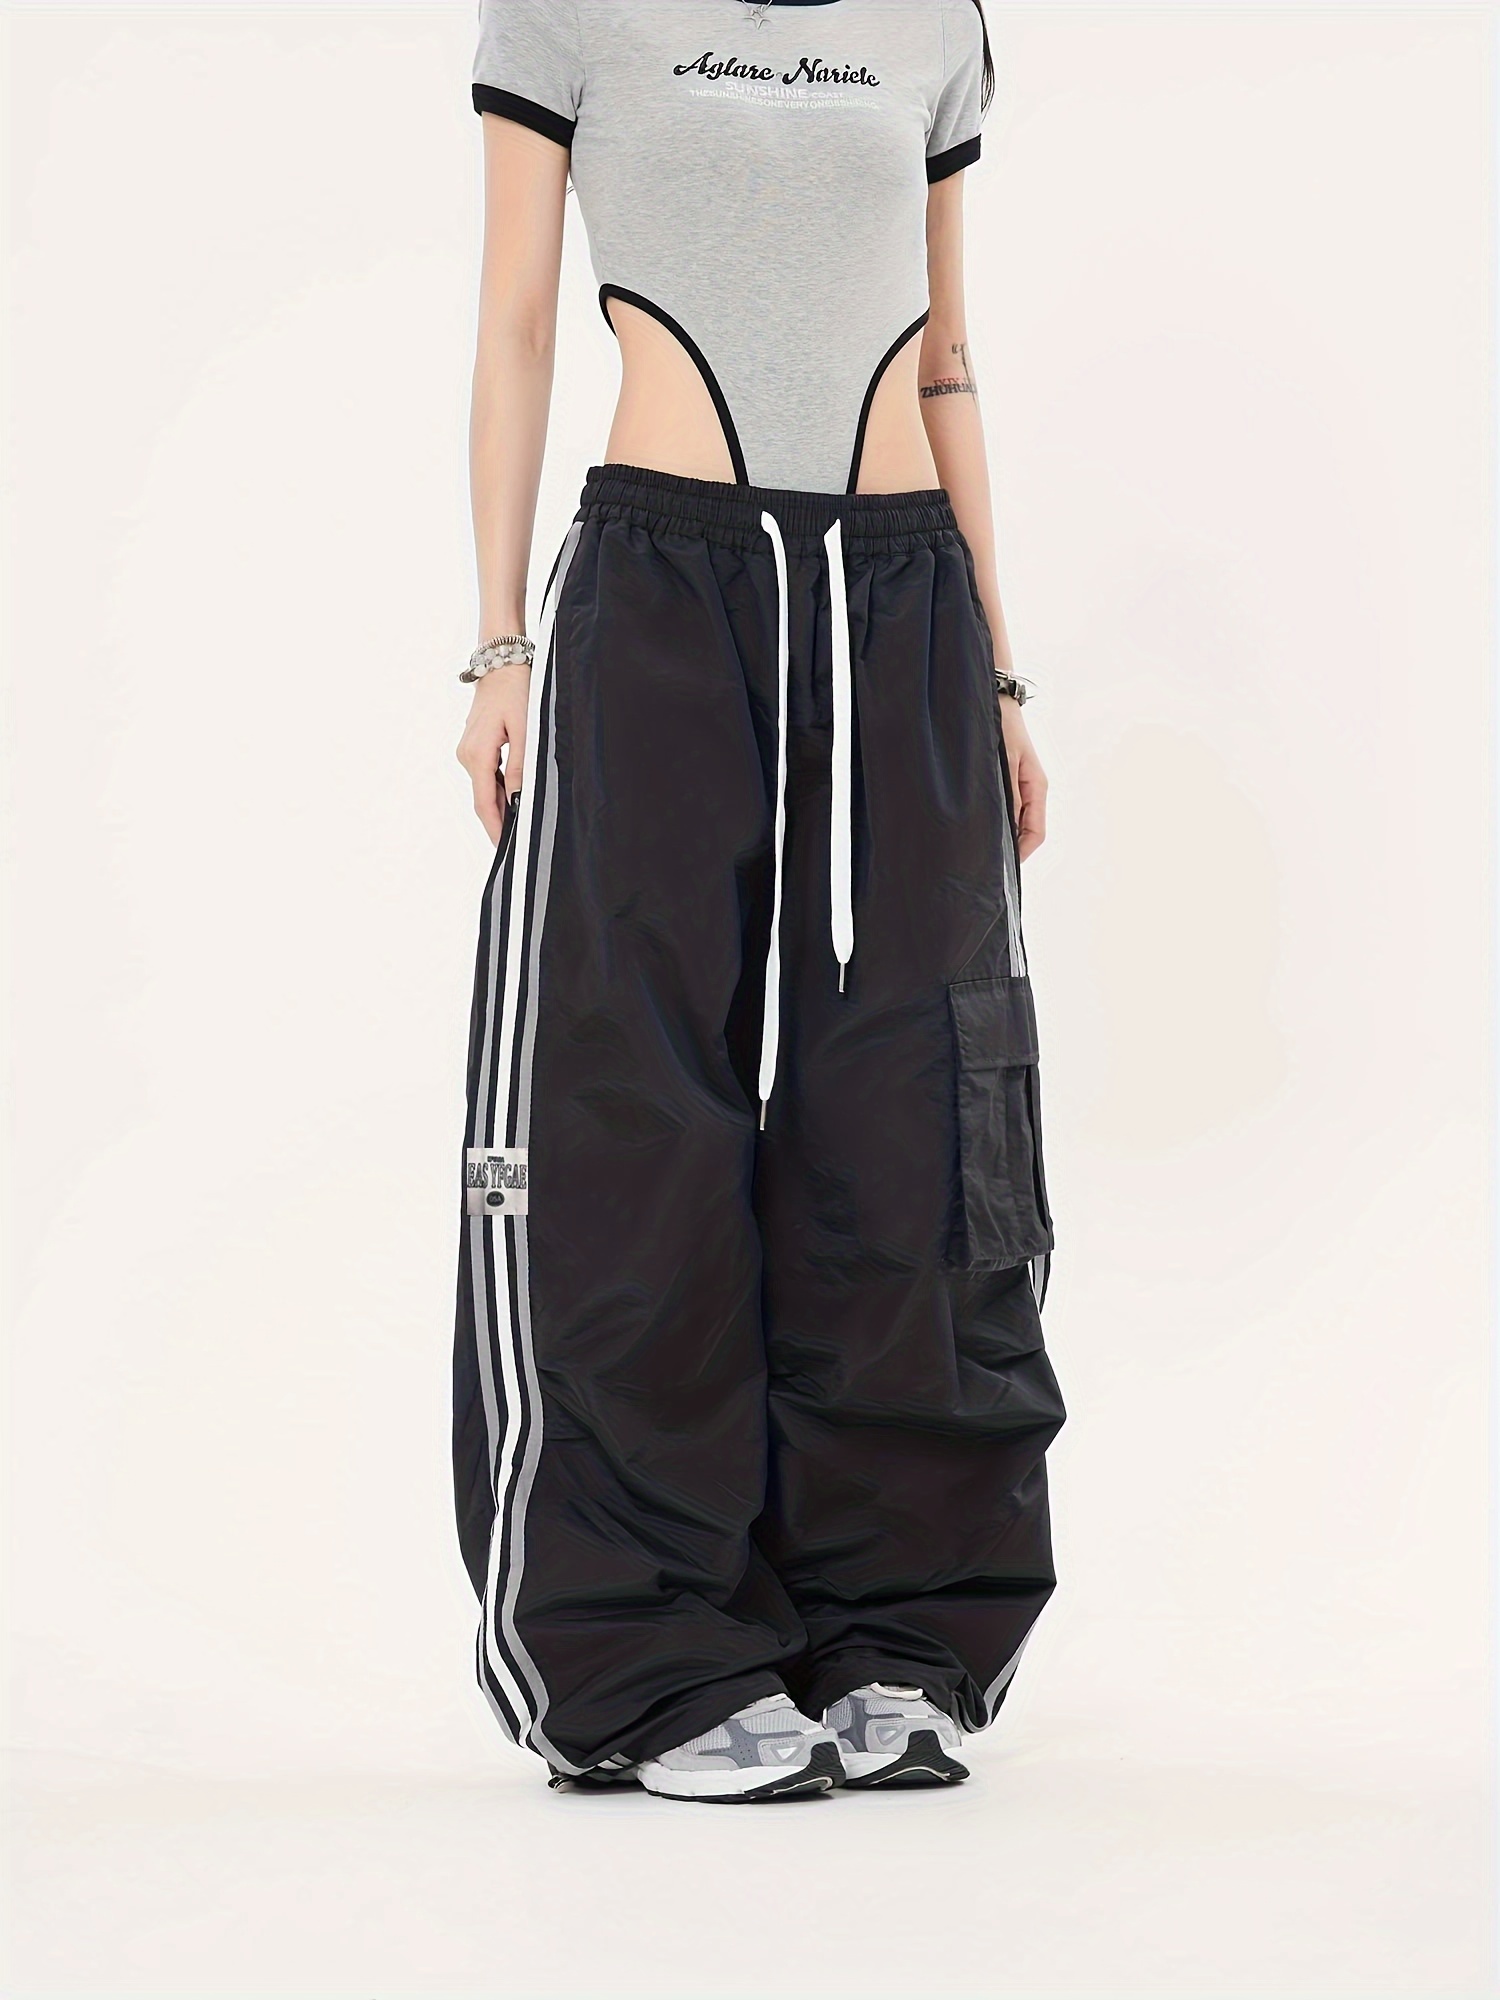 Parachute Pants Y2k Clothes Streetwear Chic And Elegant Woman